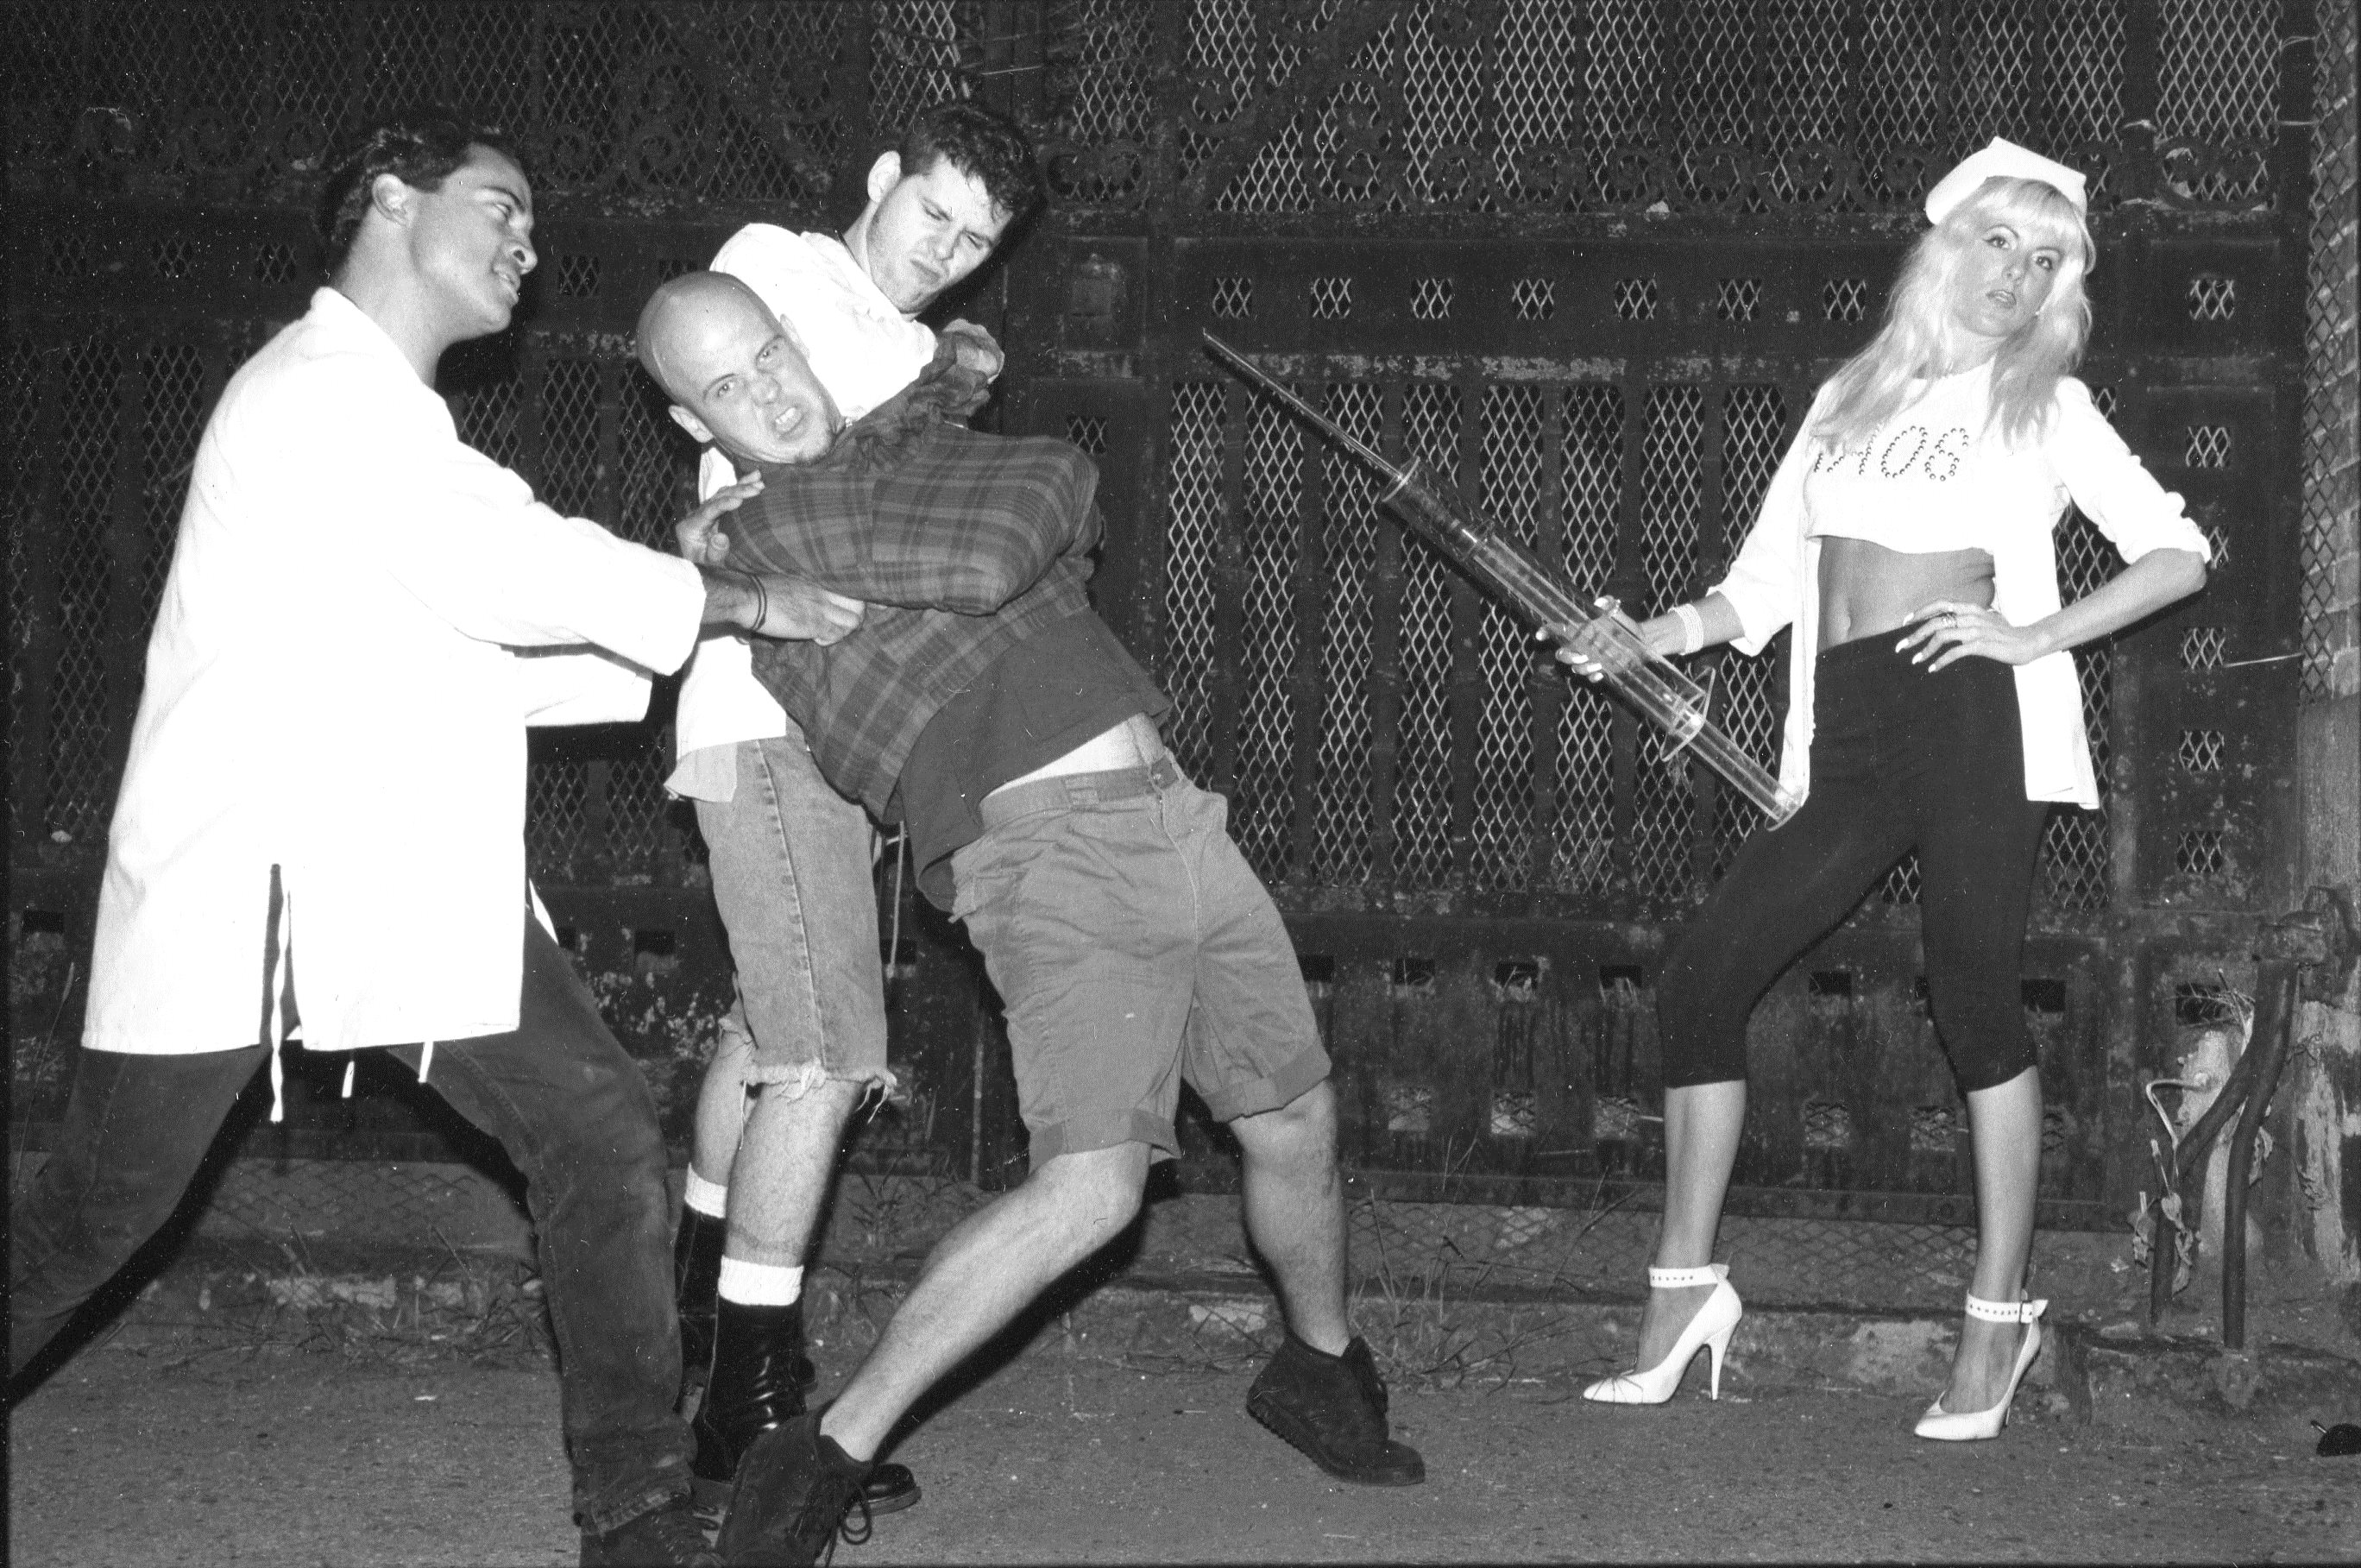 Farrah Fires past as lead singer of 'Bettyford' the band in Brooklyn 1993